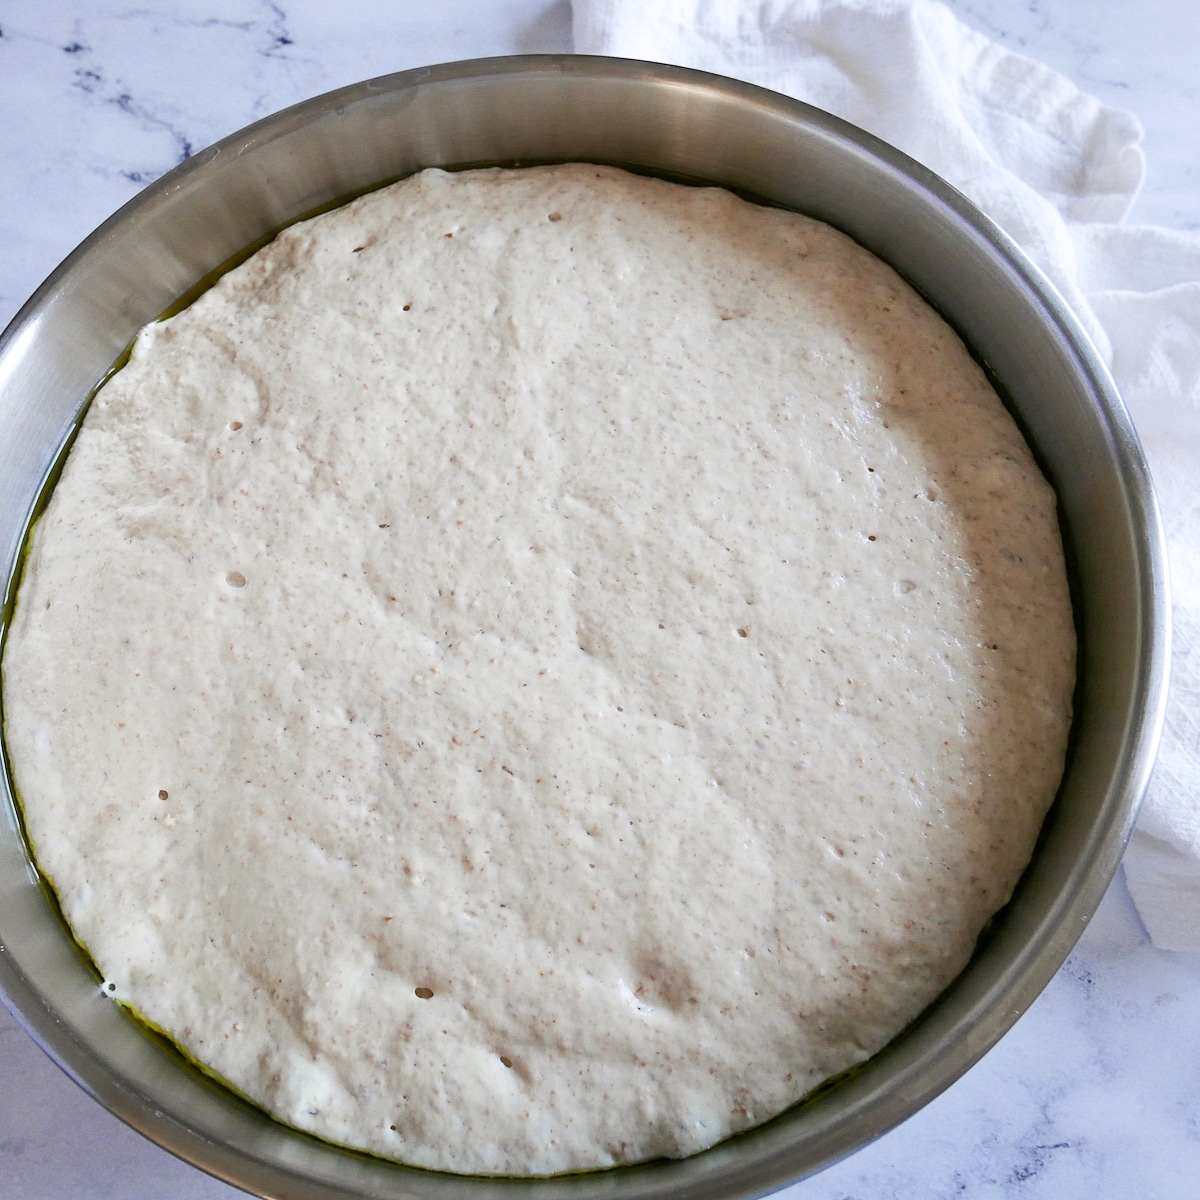 Focaccia dough in a mixing bowl after doubling in volume.